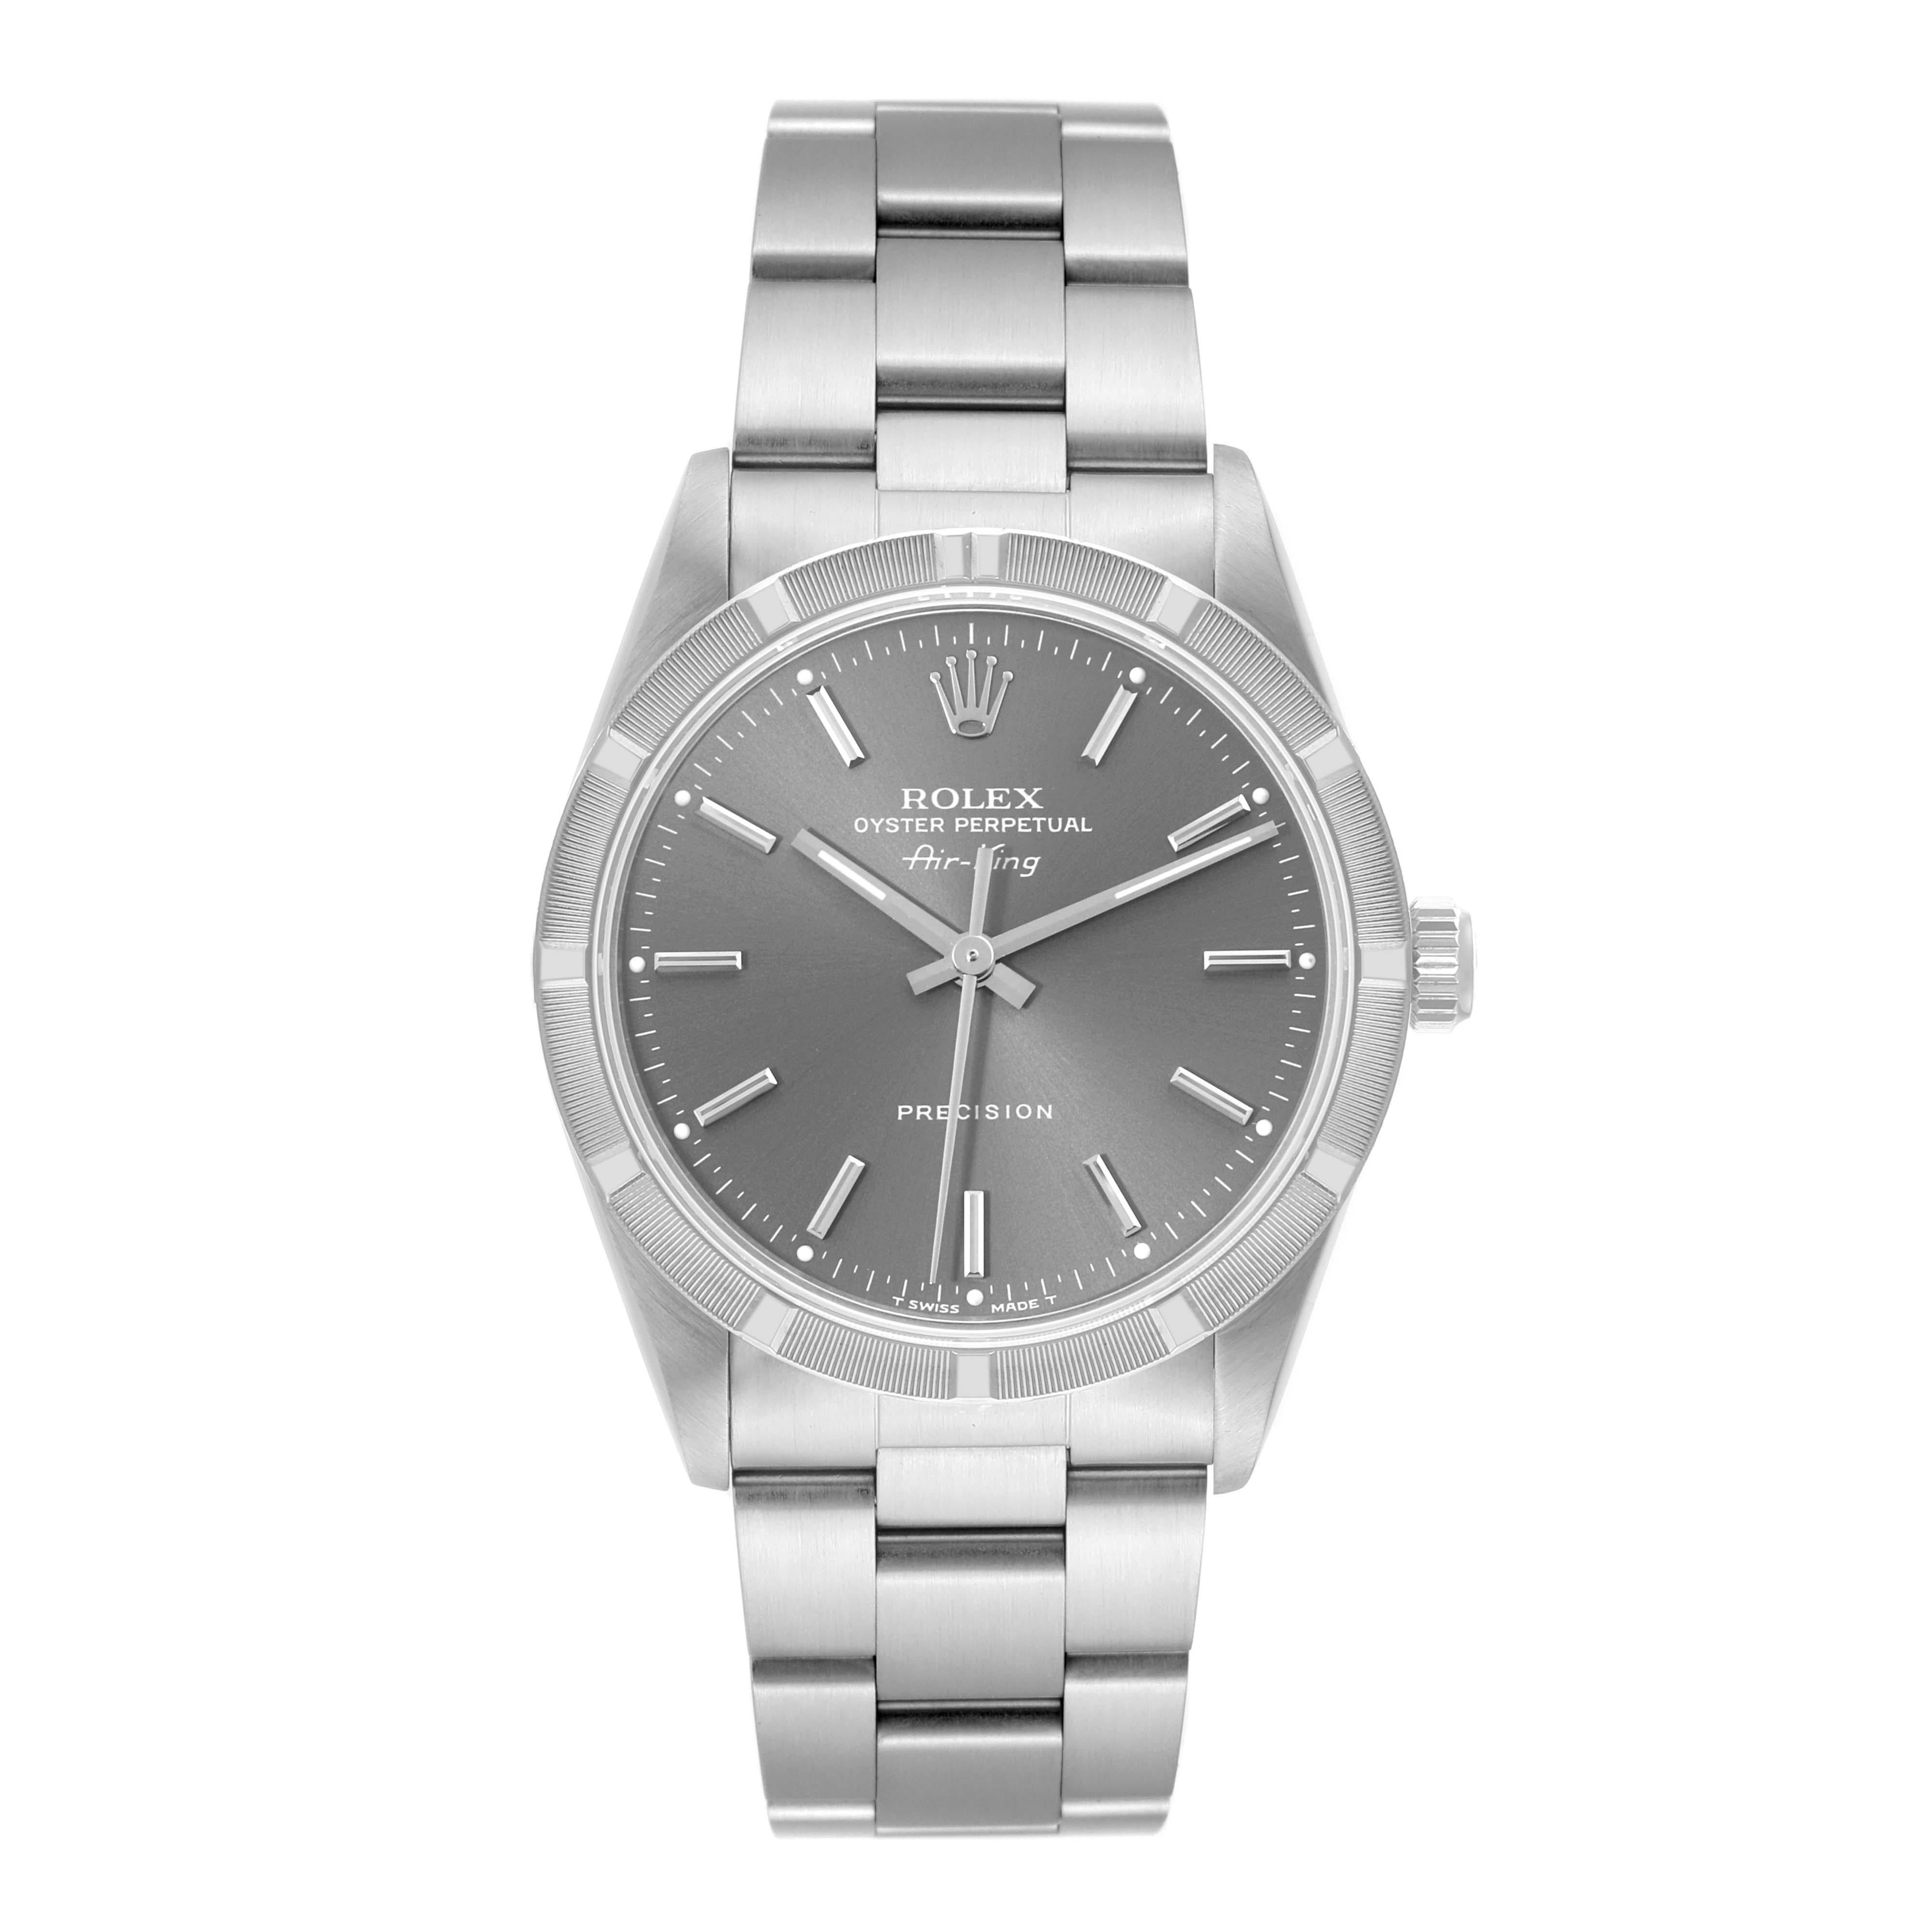 Rolex Air King Grey Dial Engine Turned Bezel Steel Mens Watch 14010. Automatic self-winding movement. Stainless steel case 34.0 mm in diameter. Rolex logo on the crown. Stainless steel engine turned bezel. Scratch resistant sapphire crystal. Grey